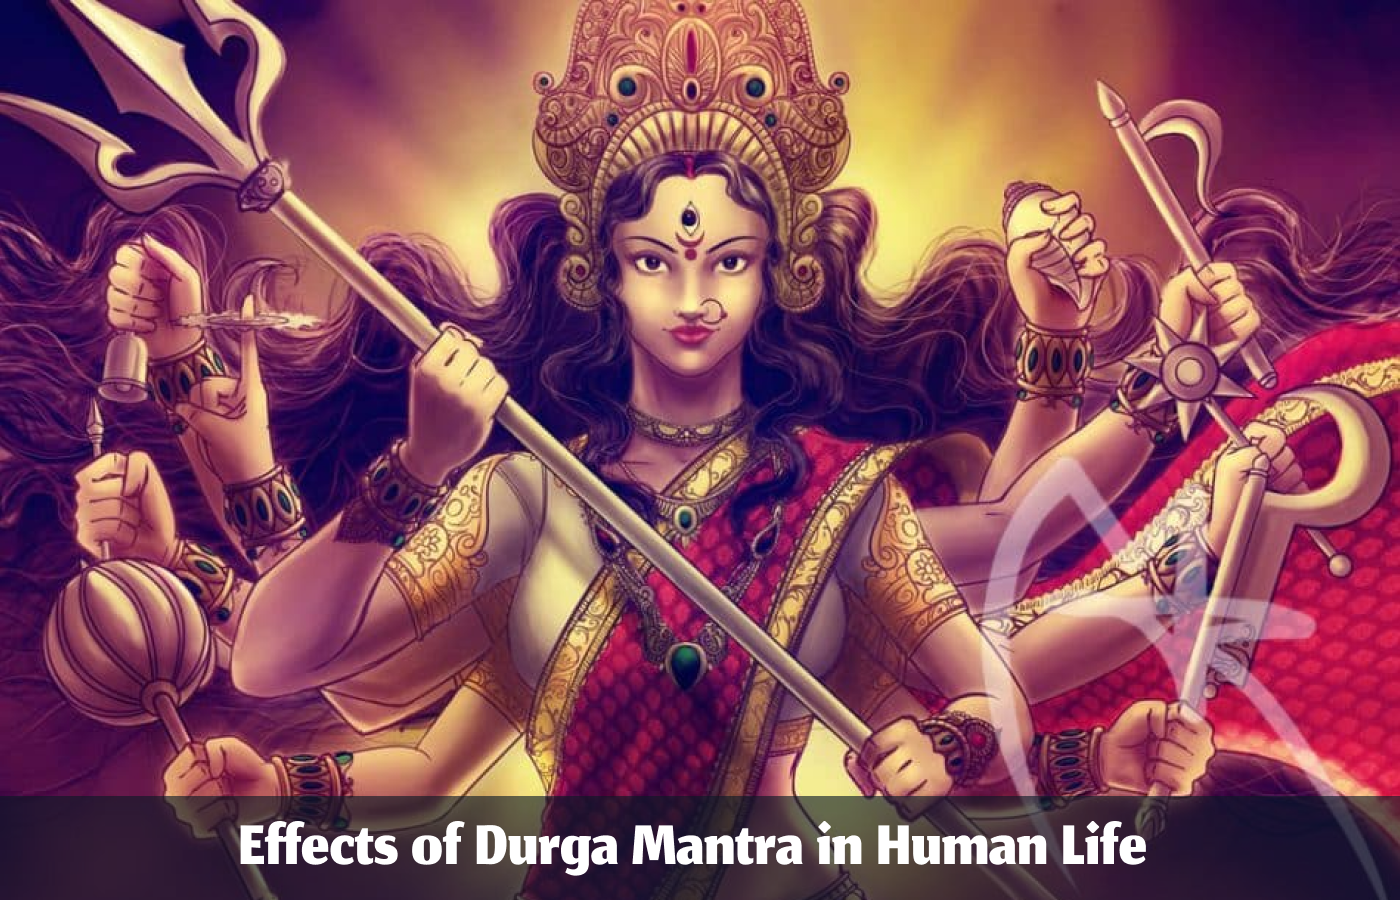 Effects of Durga Mantra in Human Life According to Astrology